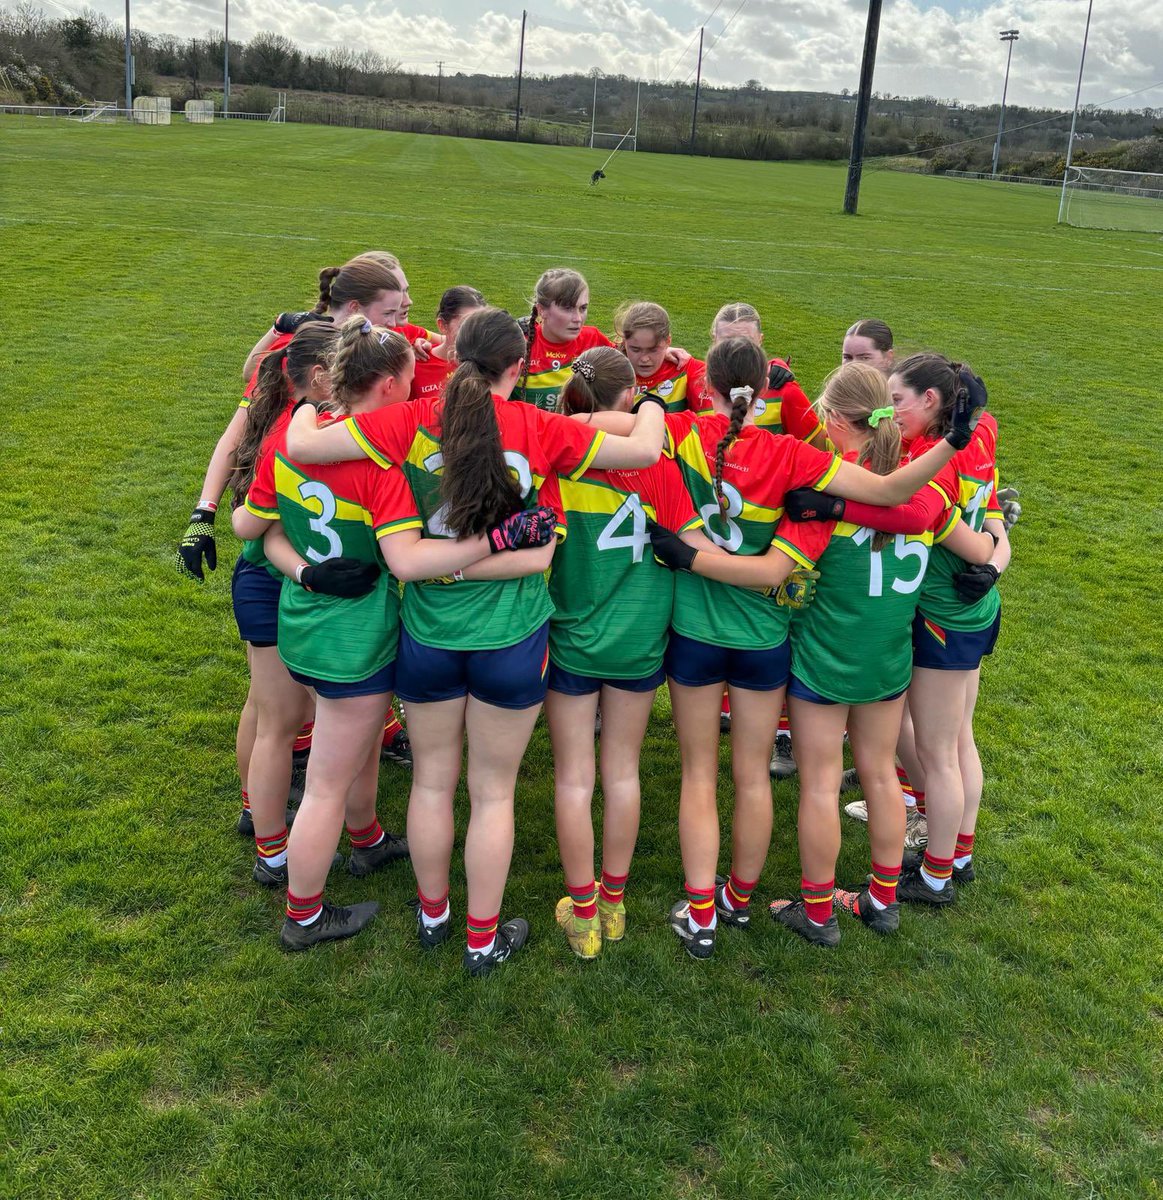 Well done to our minor girls yesterday ❤️💚💛 They now move on to play Louth in R3 next Saturday at home. Thanks to all the supporters for turning up on a bitter cold day, and we look forward to seeing a big turnout in Carlow next weekend!